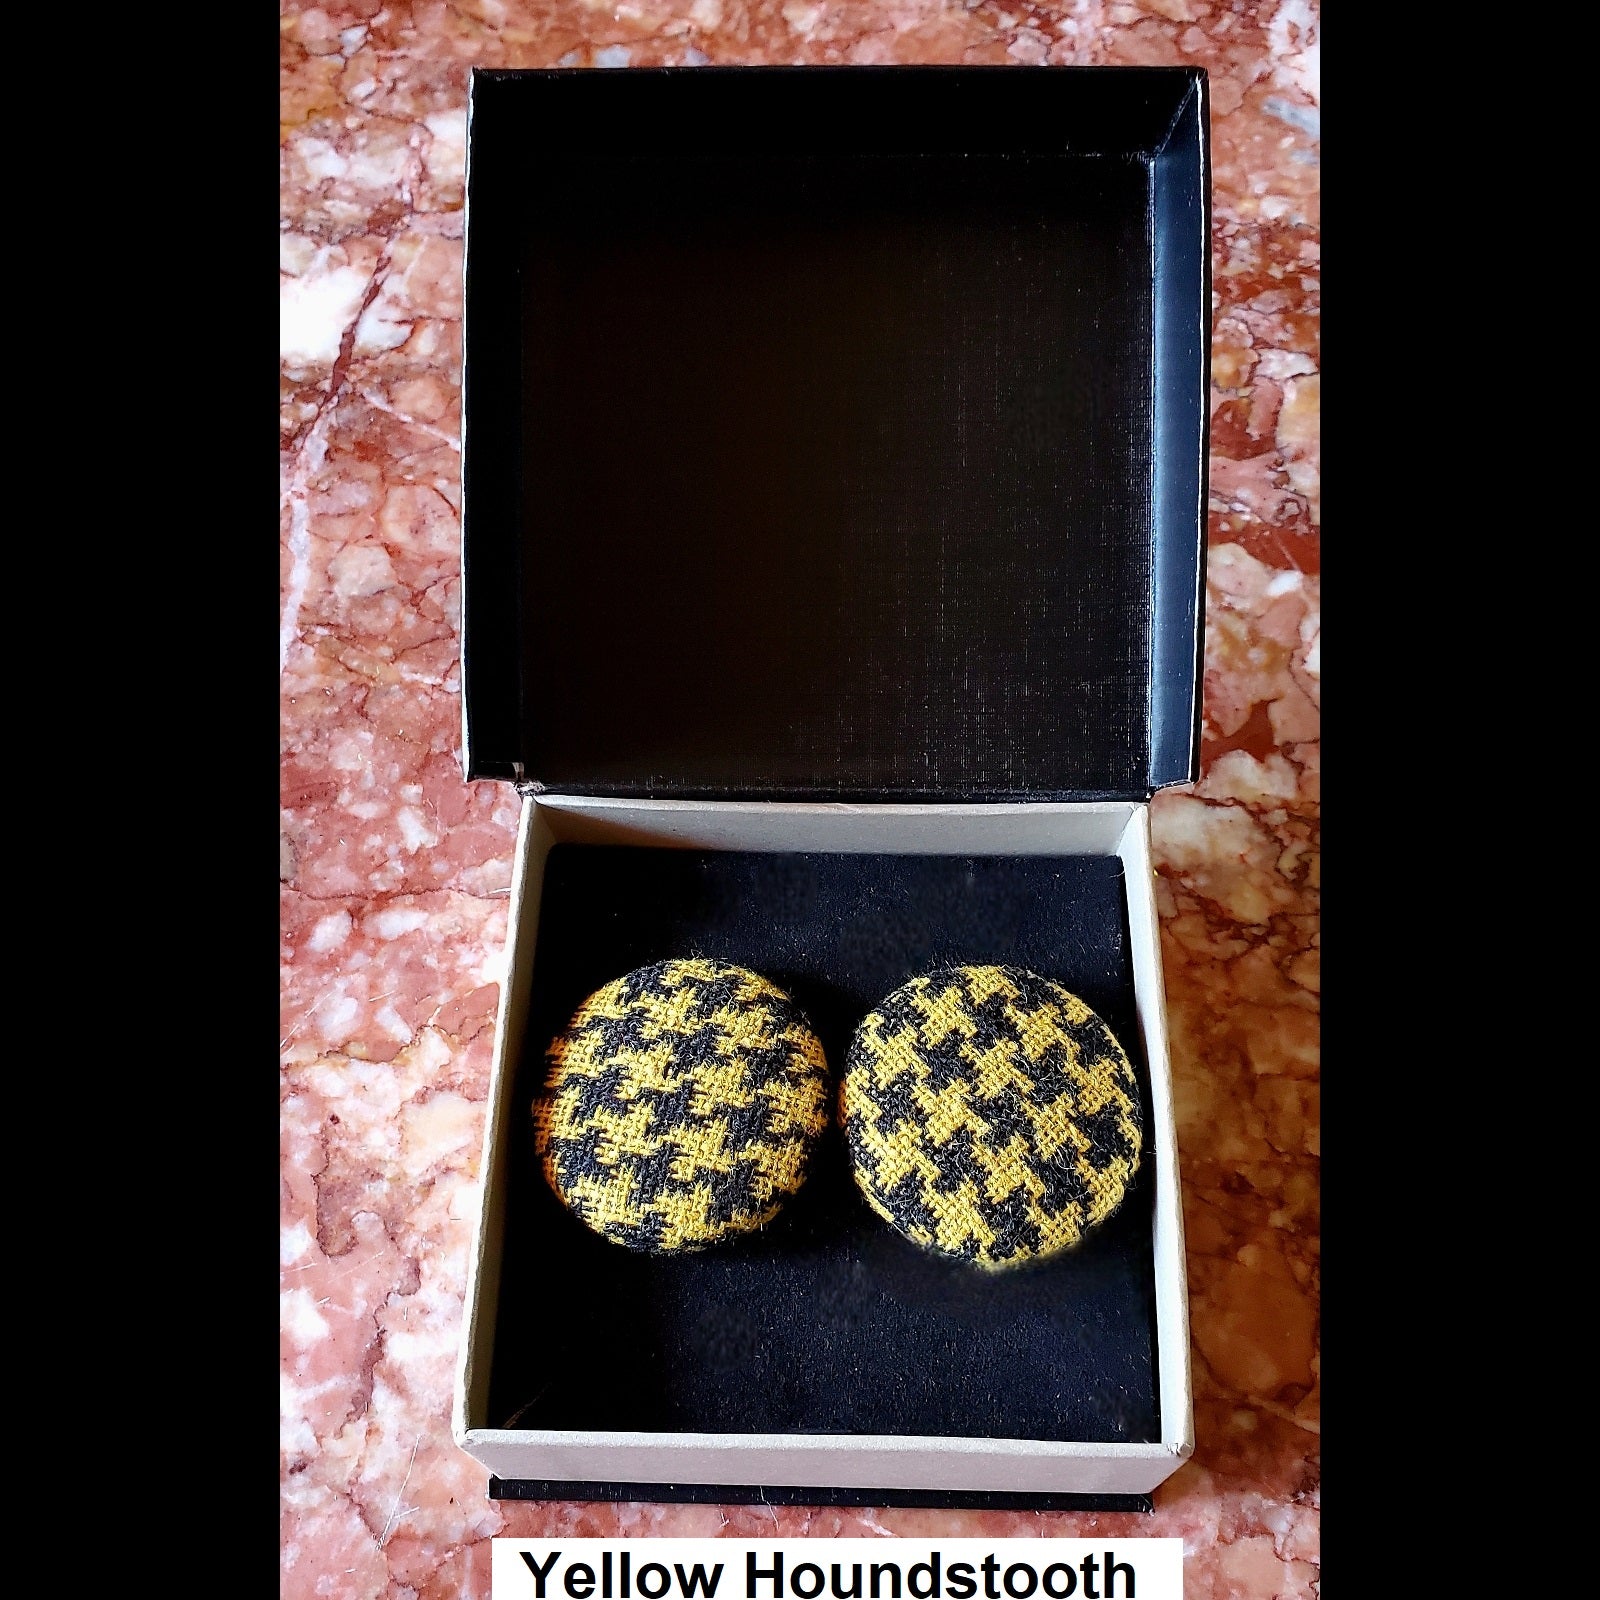 Yellow houndstooth print button earrings in jewelry box